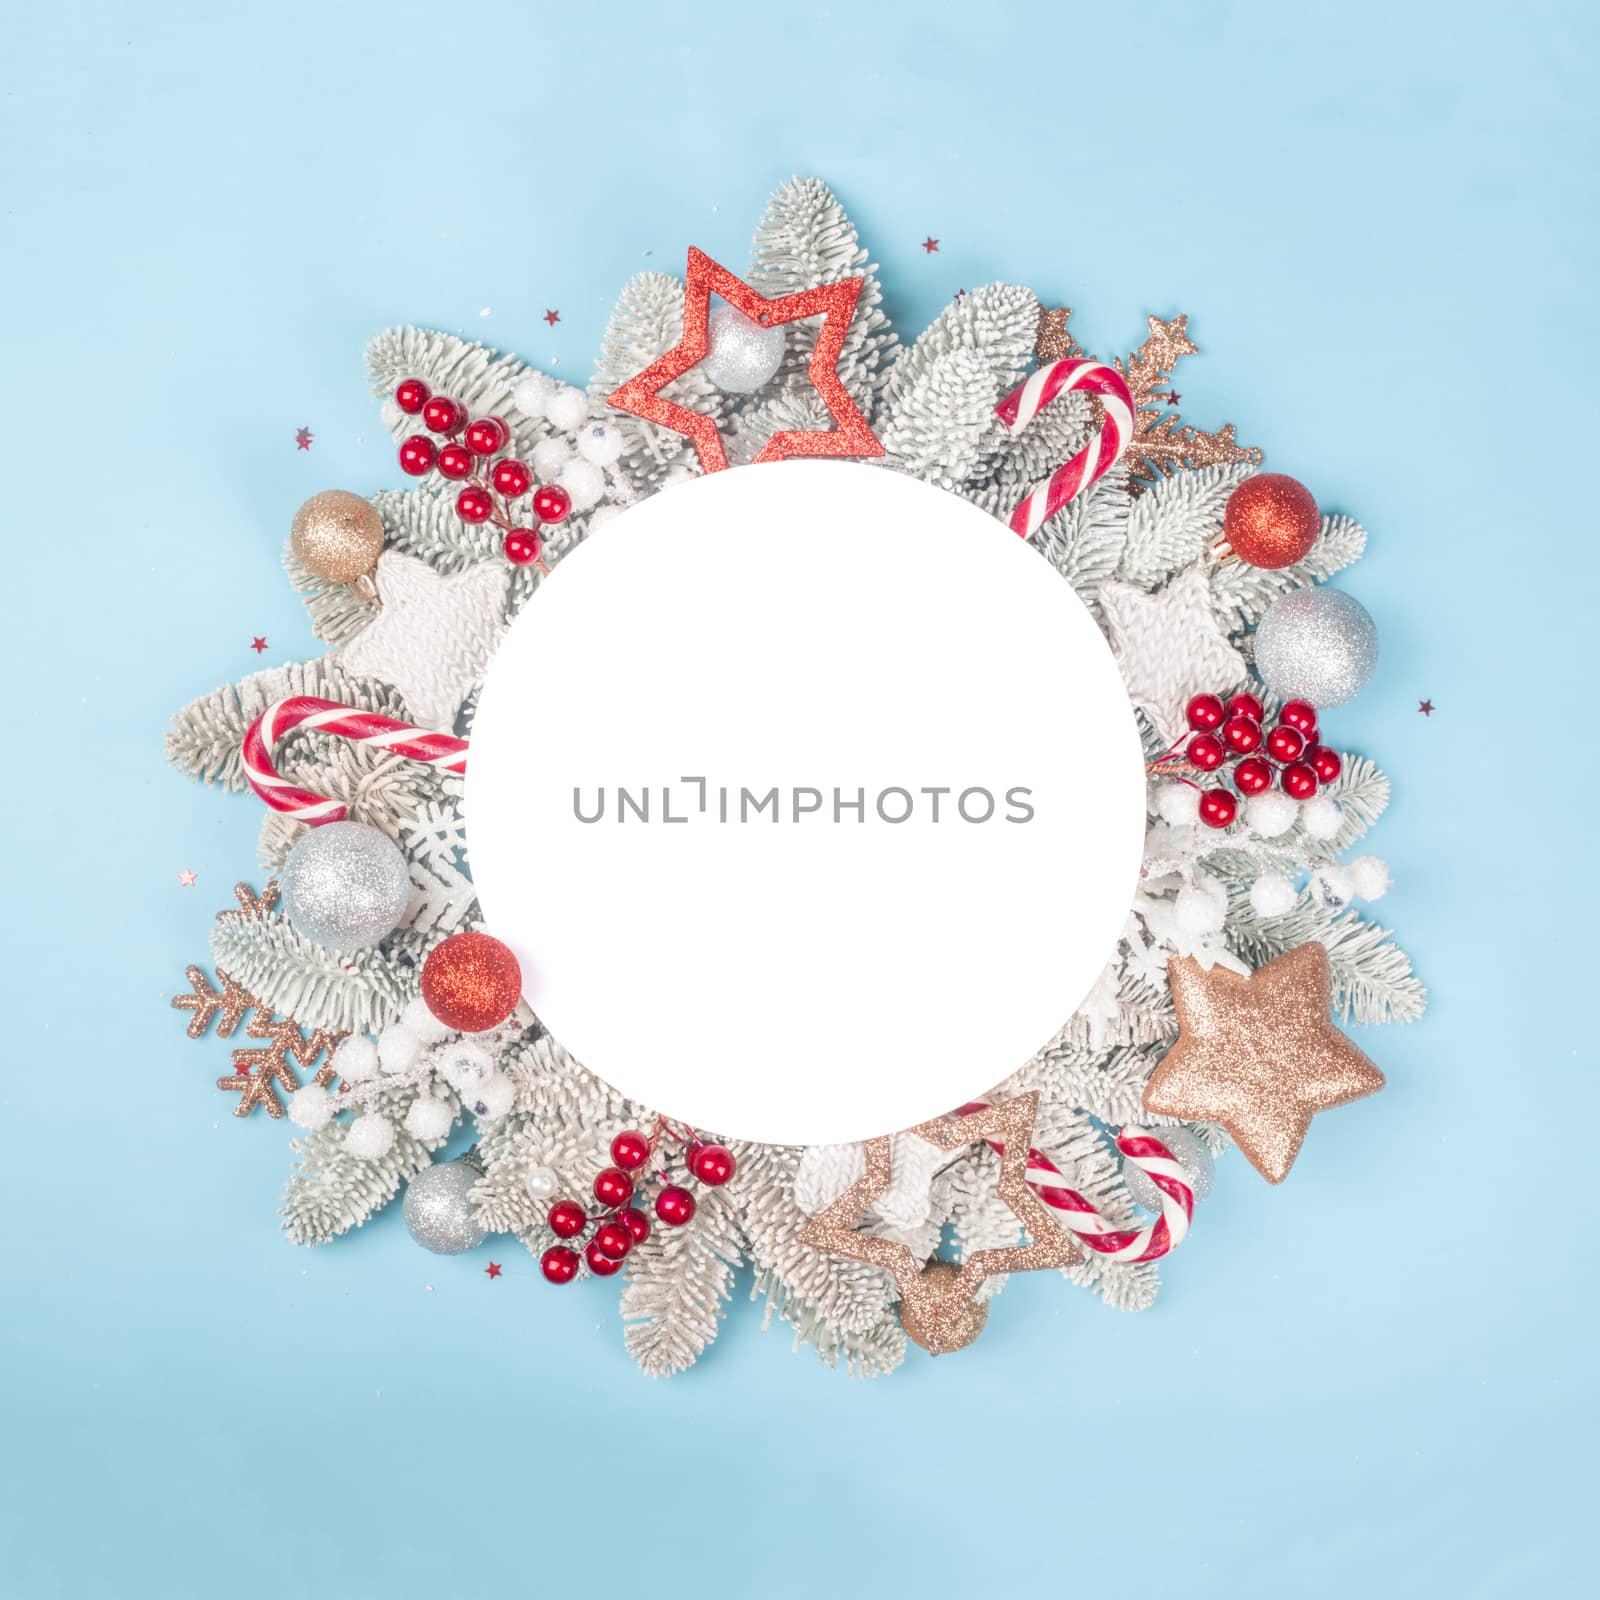 Frosted fir tree twigs and Christmas decorative bauble balls on blue background with white circle card with copy space for text template flat lay top view design